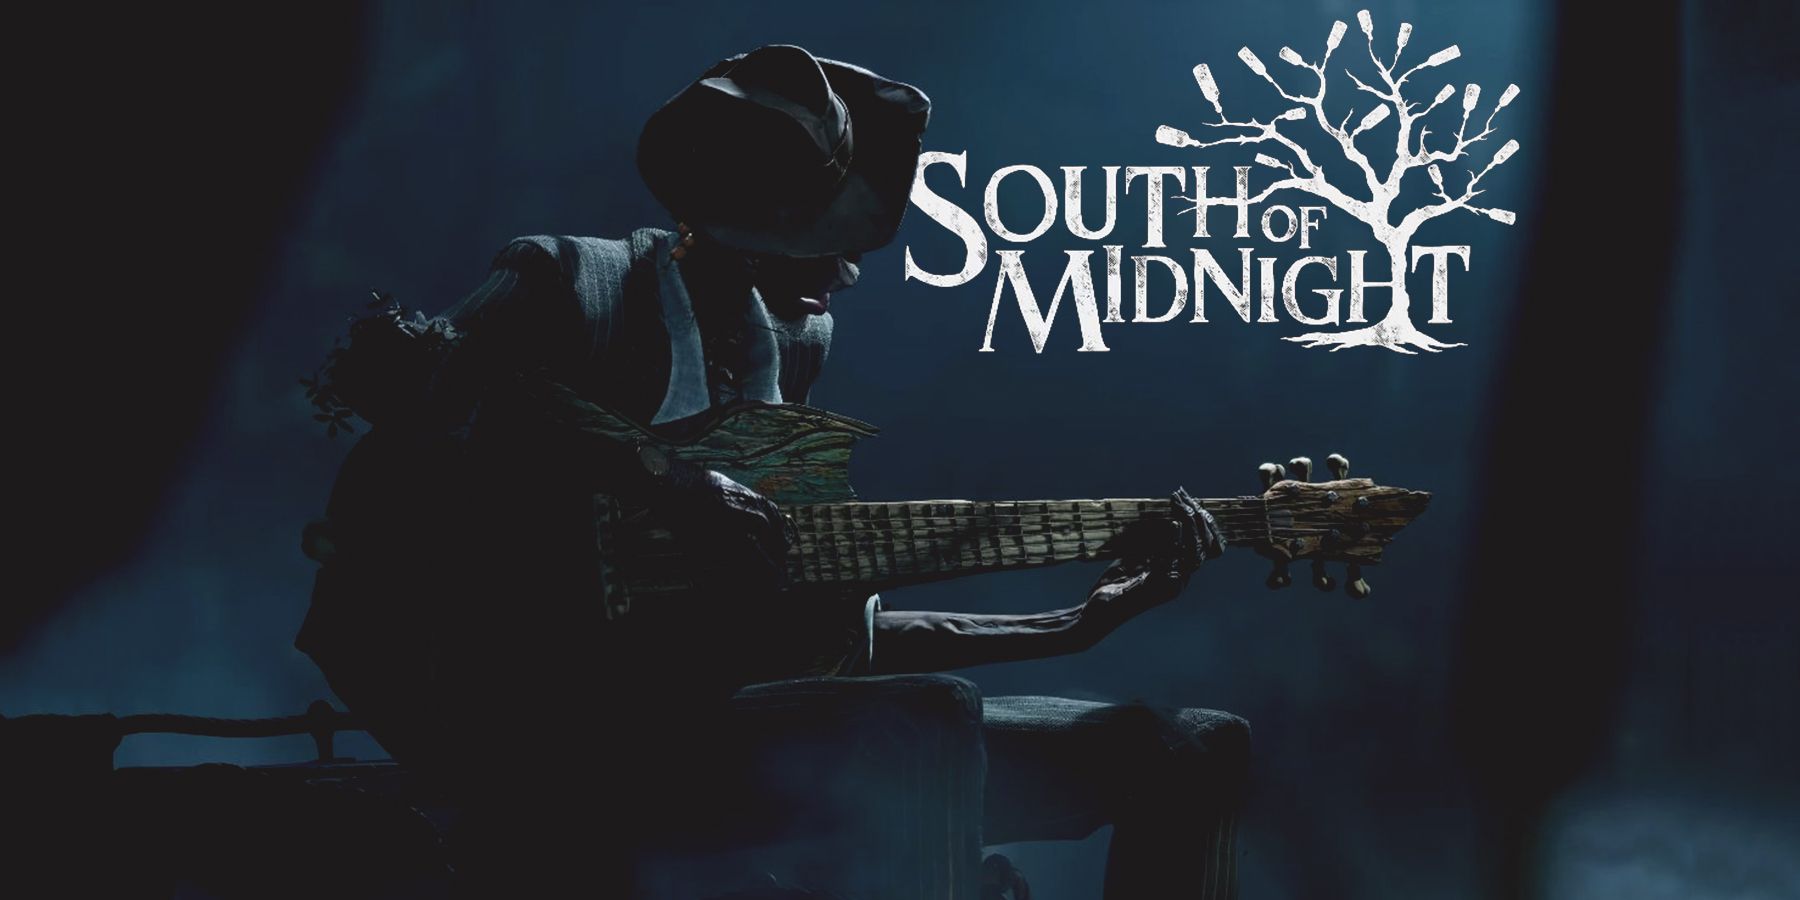 South of Midnight Compulsion Games reveal trailer still with logo